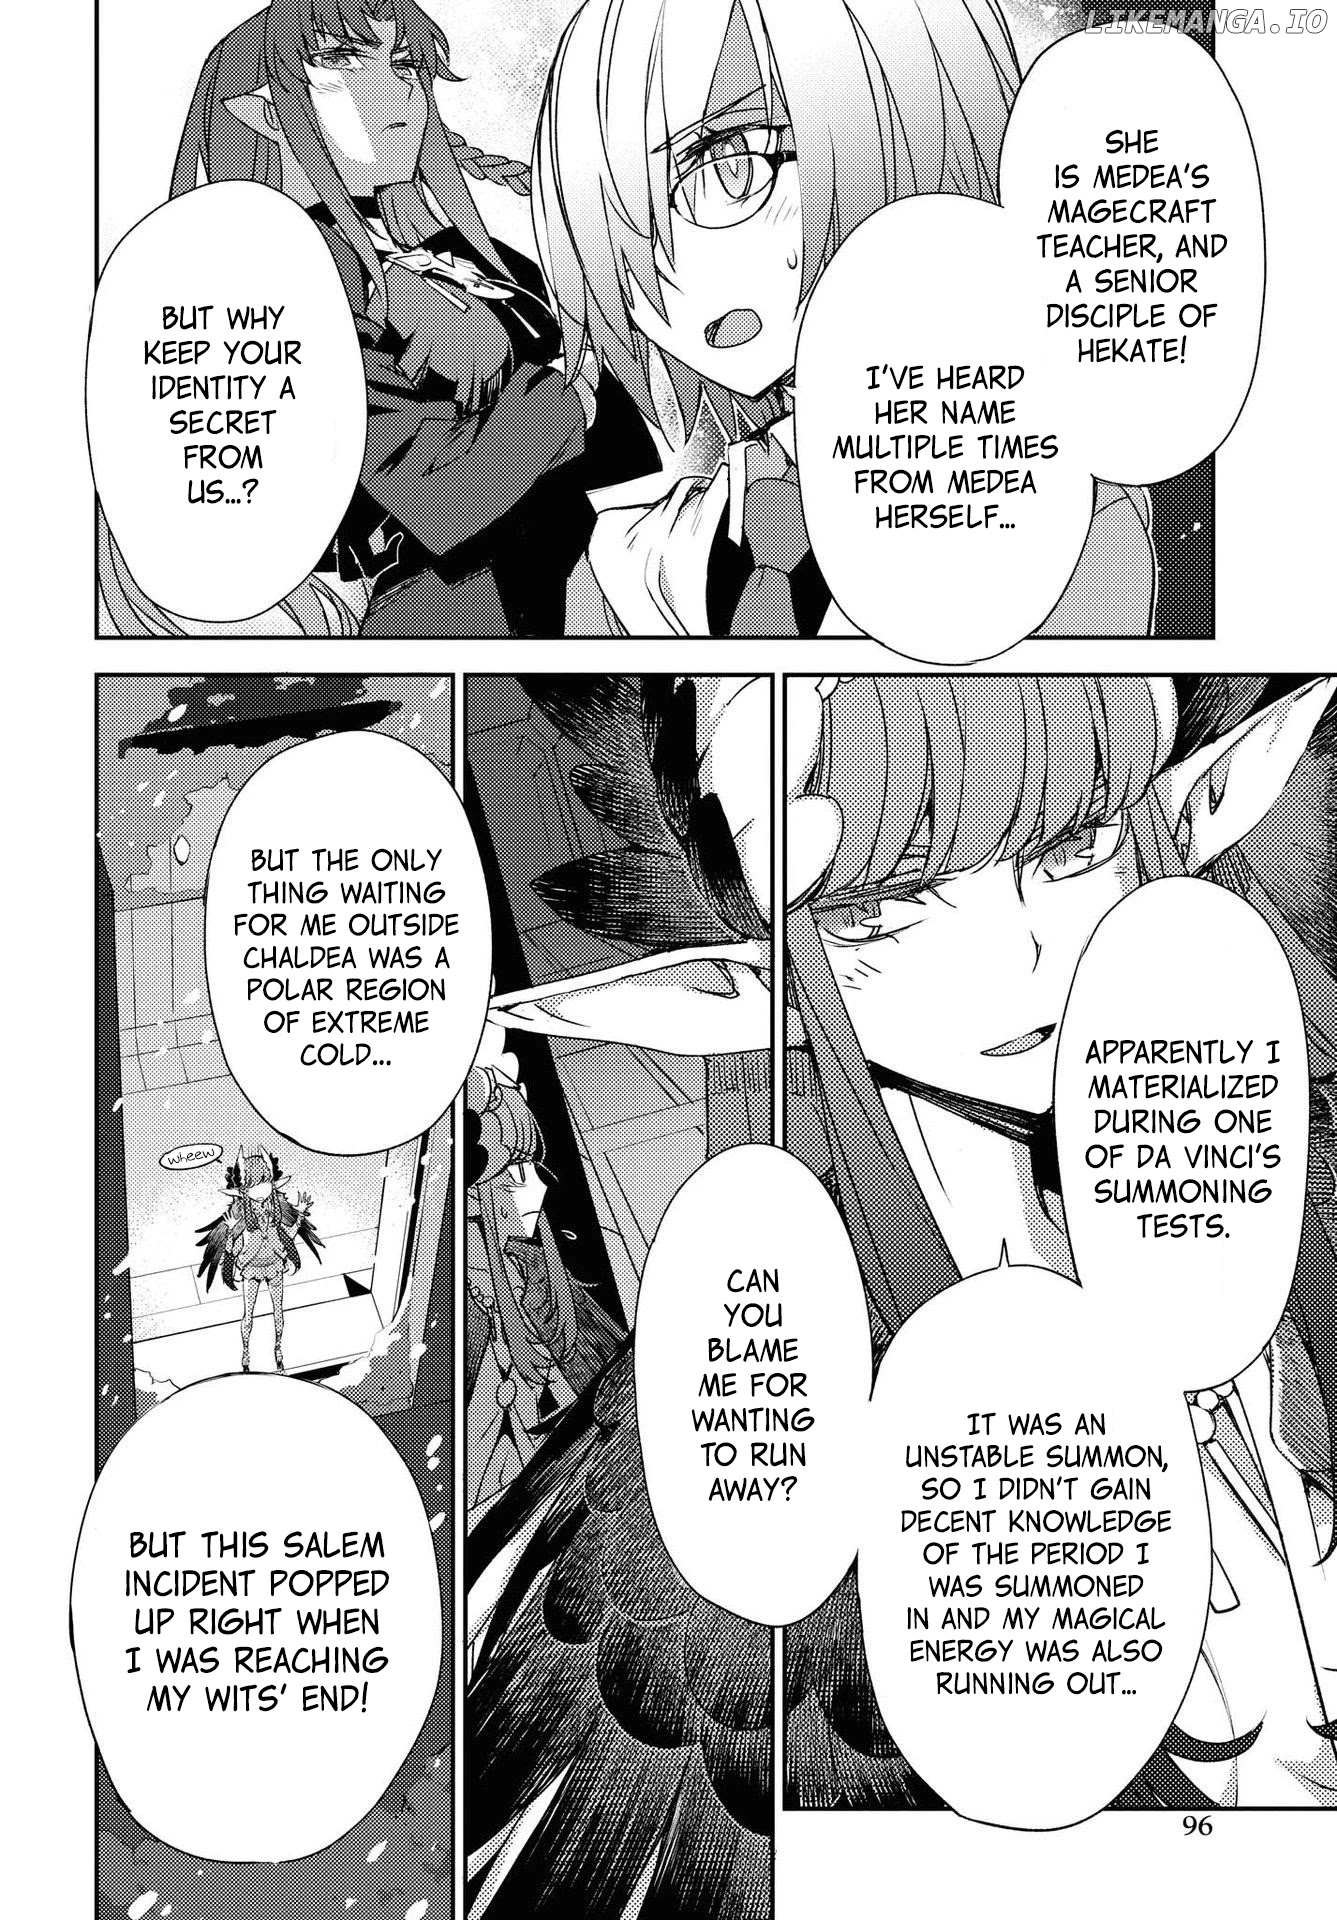 Fate/Grand Order: Epic of Remnant - Subspecies Singularity IV: Taboo Advent Salem: Salem of Heresy chapter 19 - page 14